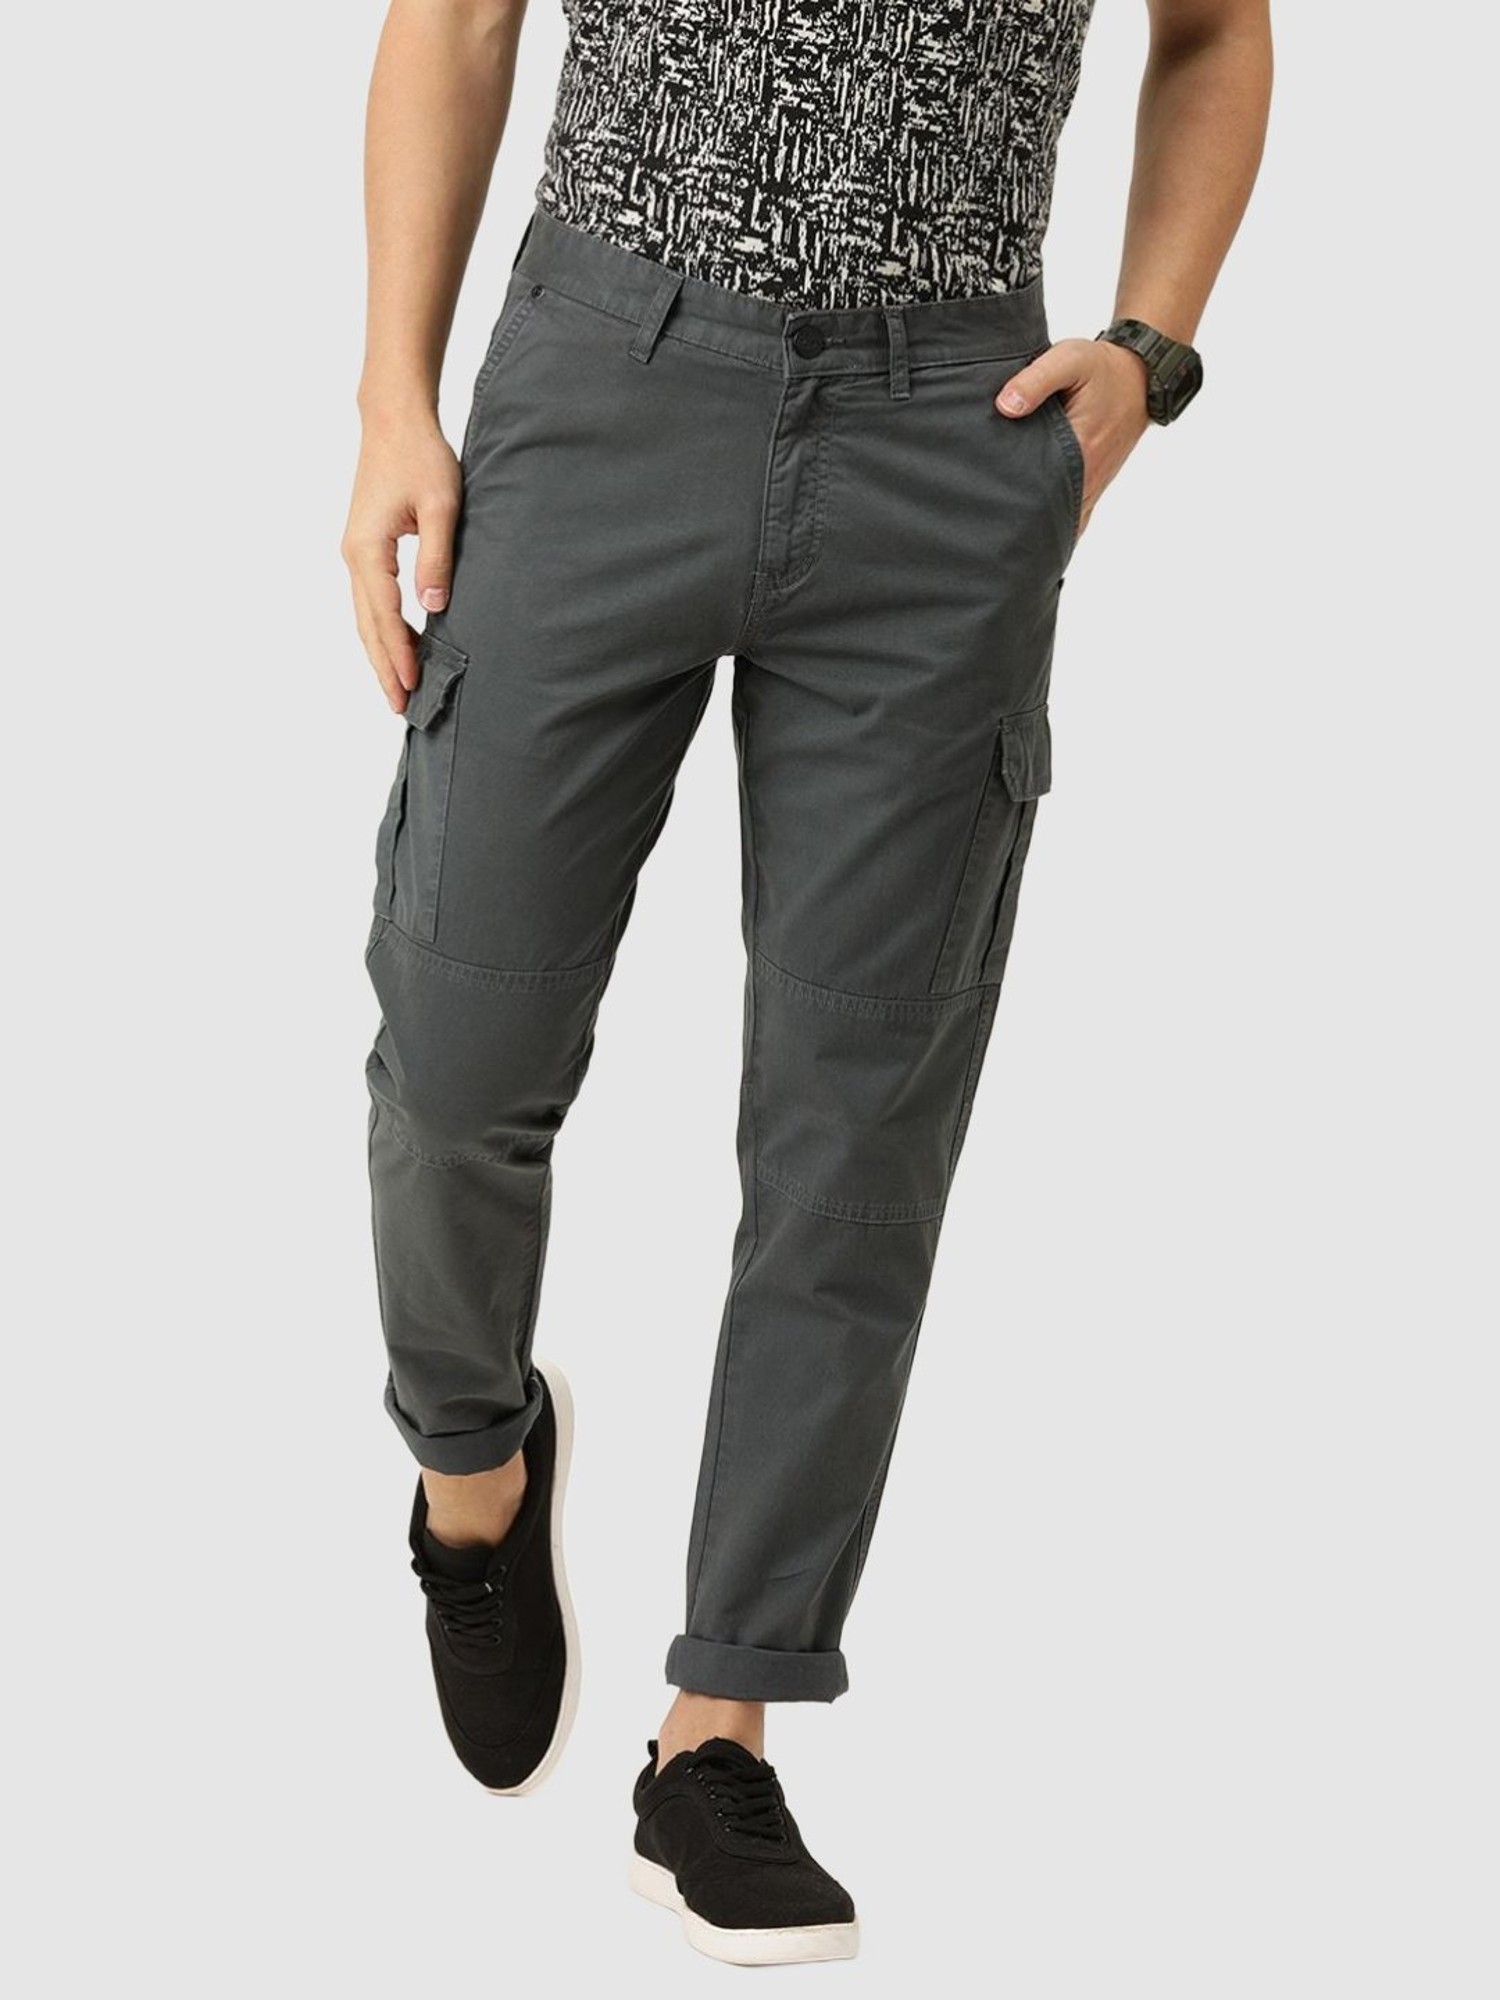 Buy Charcoal Black Trousers  Pants for Men by Buda Jeans Co Online   Ajiocom